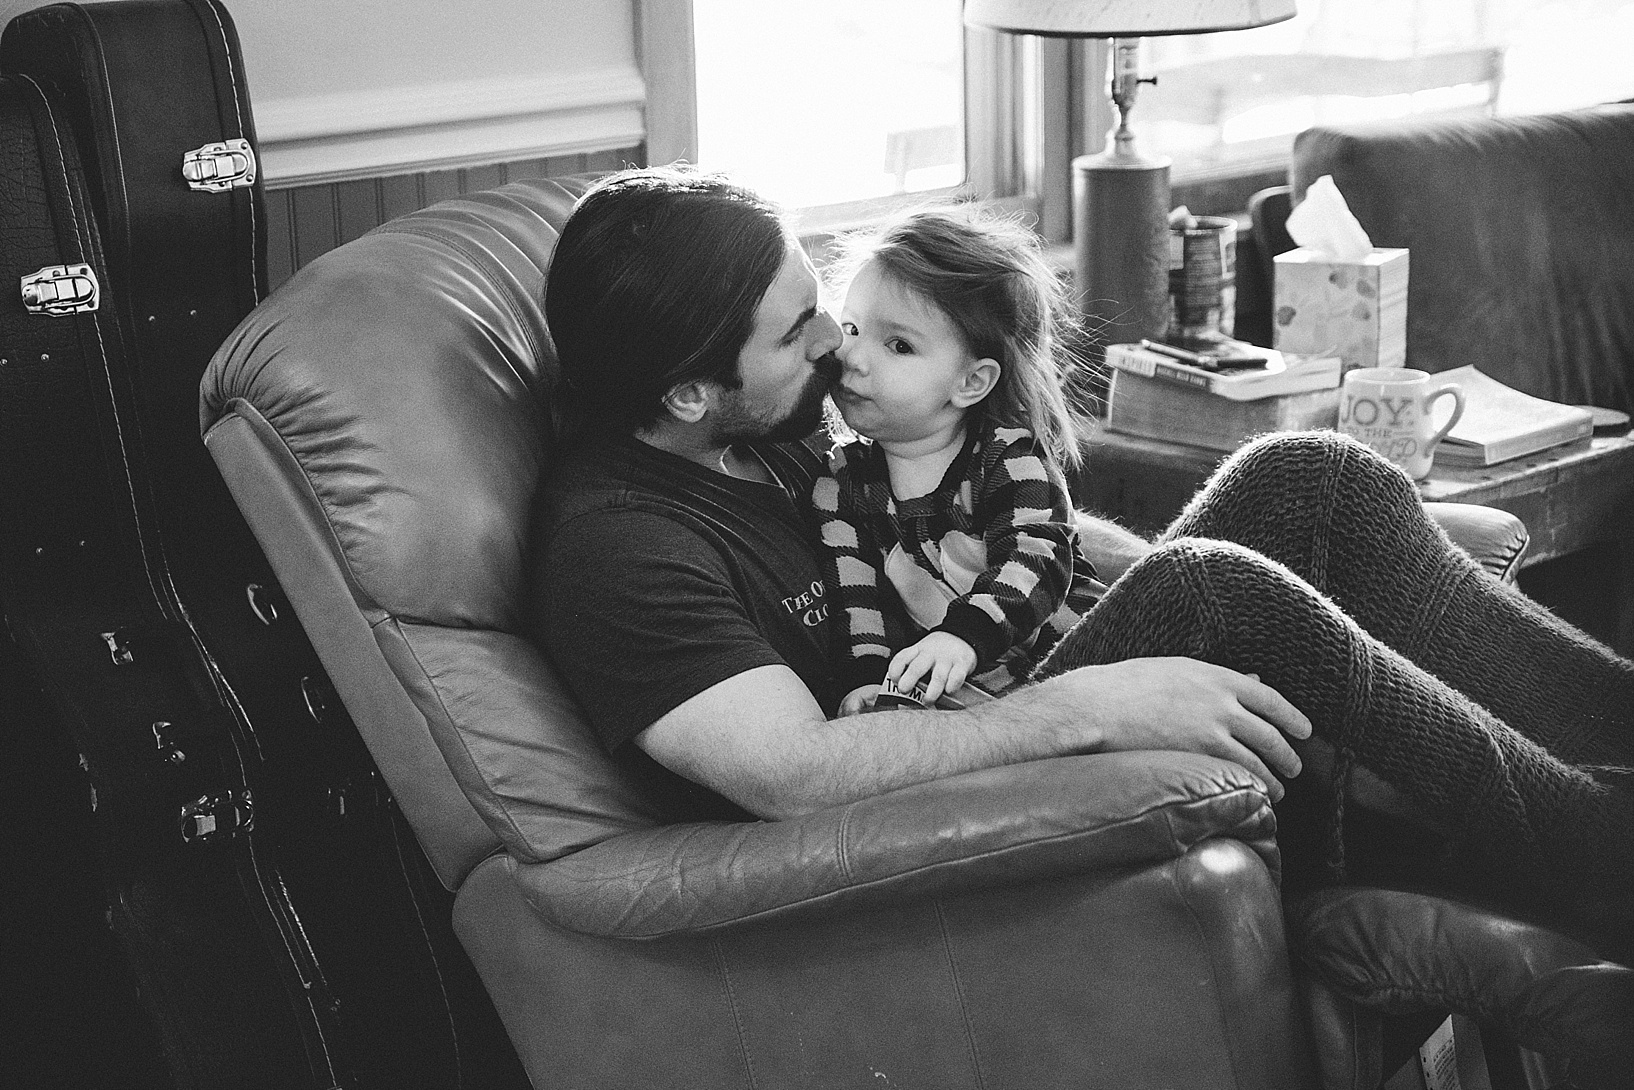 dad sitting in recliner kissing daughter on cheek